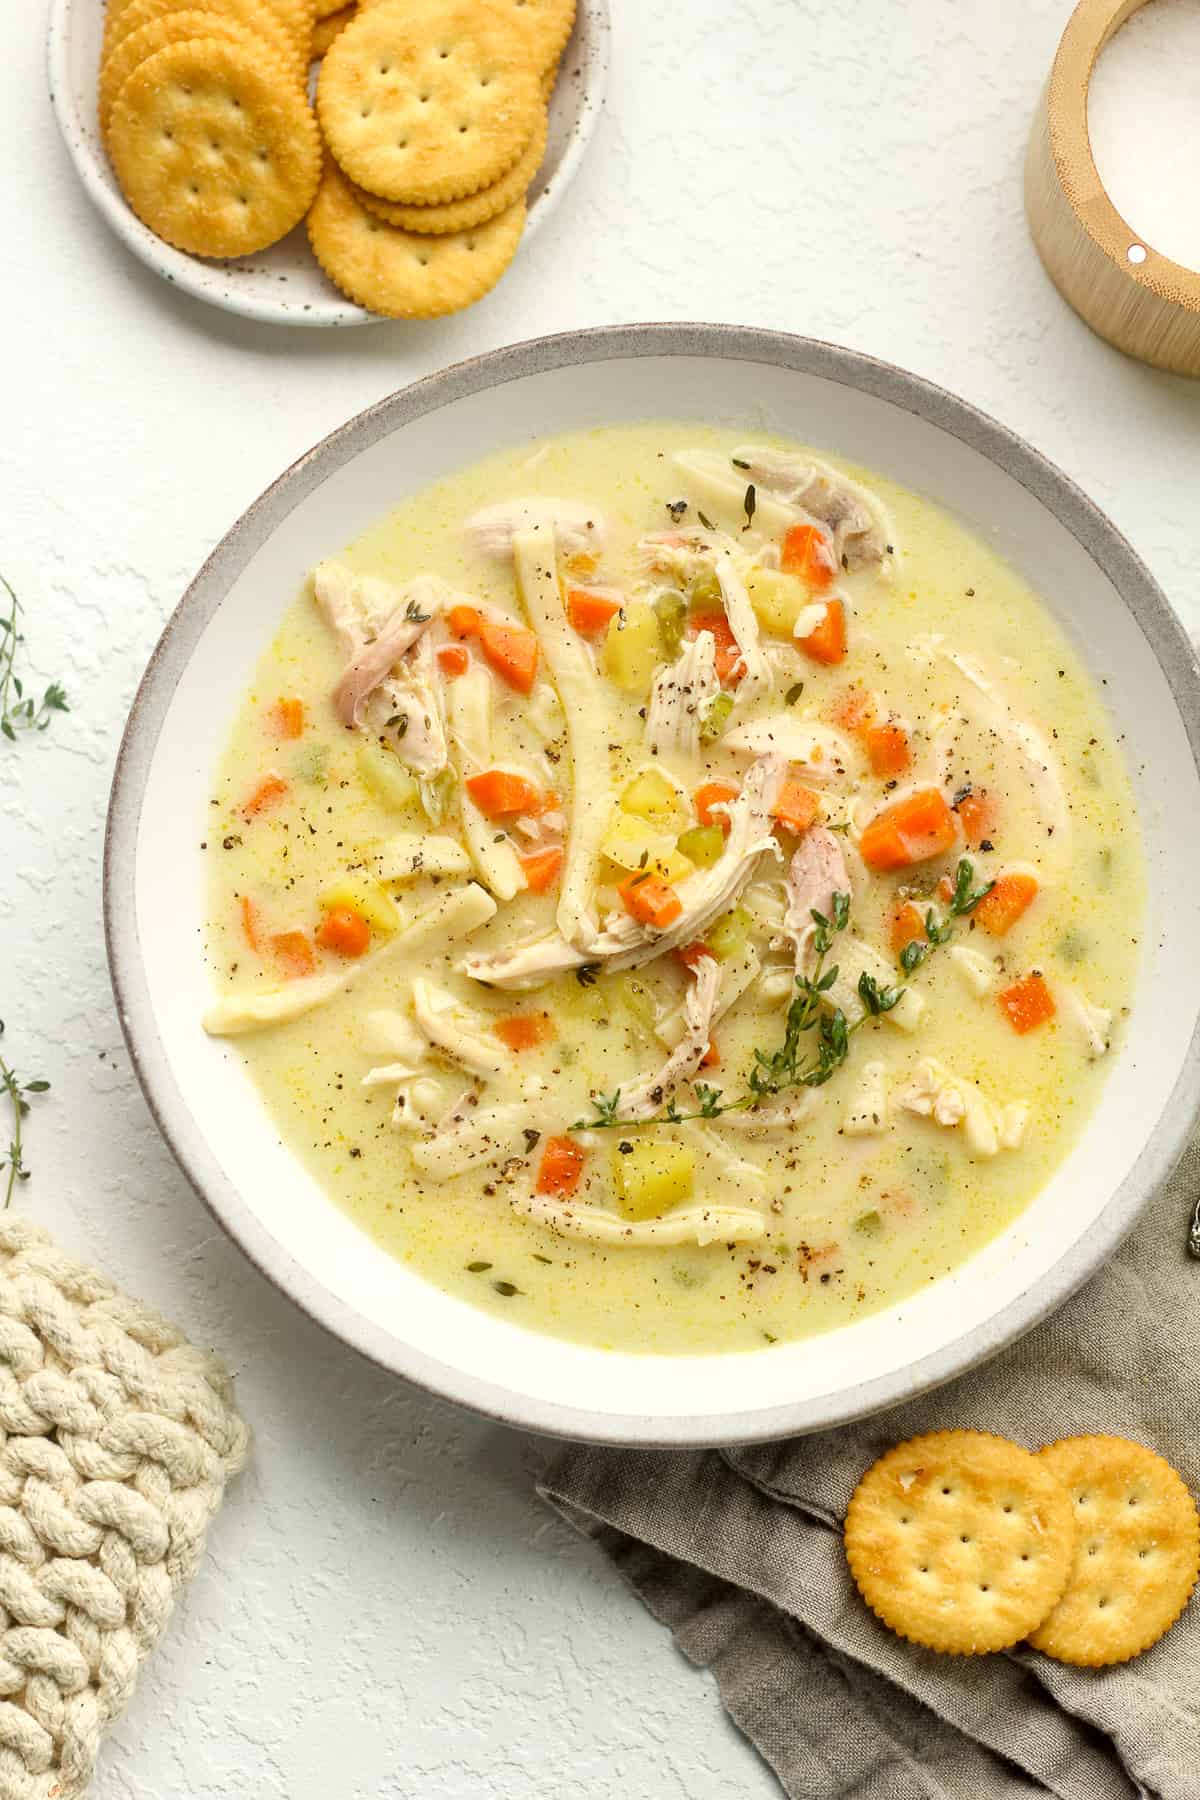 A bowl of creamy chicken noodle soup with a plate of crackers.